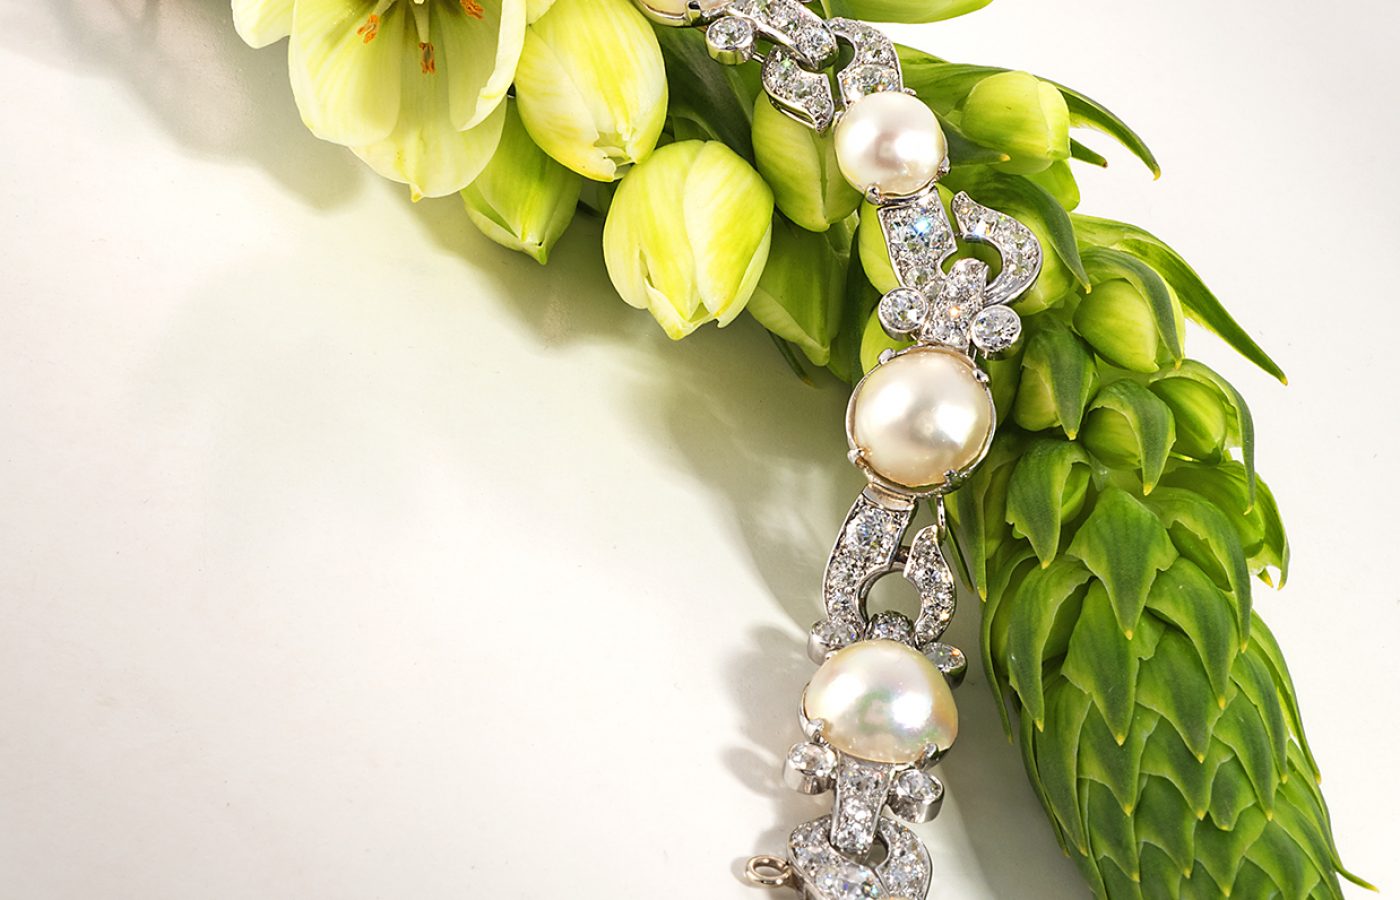 Beautiful vintage diamond and pearl bracelet arranged over a flower bud with delicate white flowers and green buds.